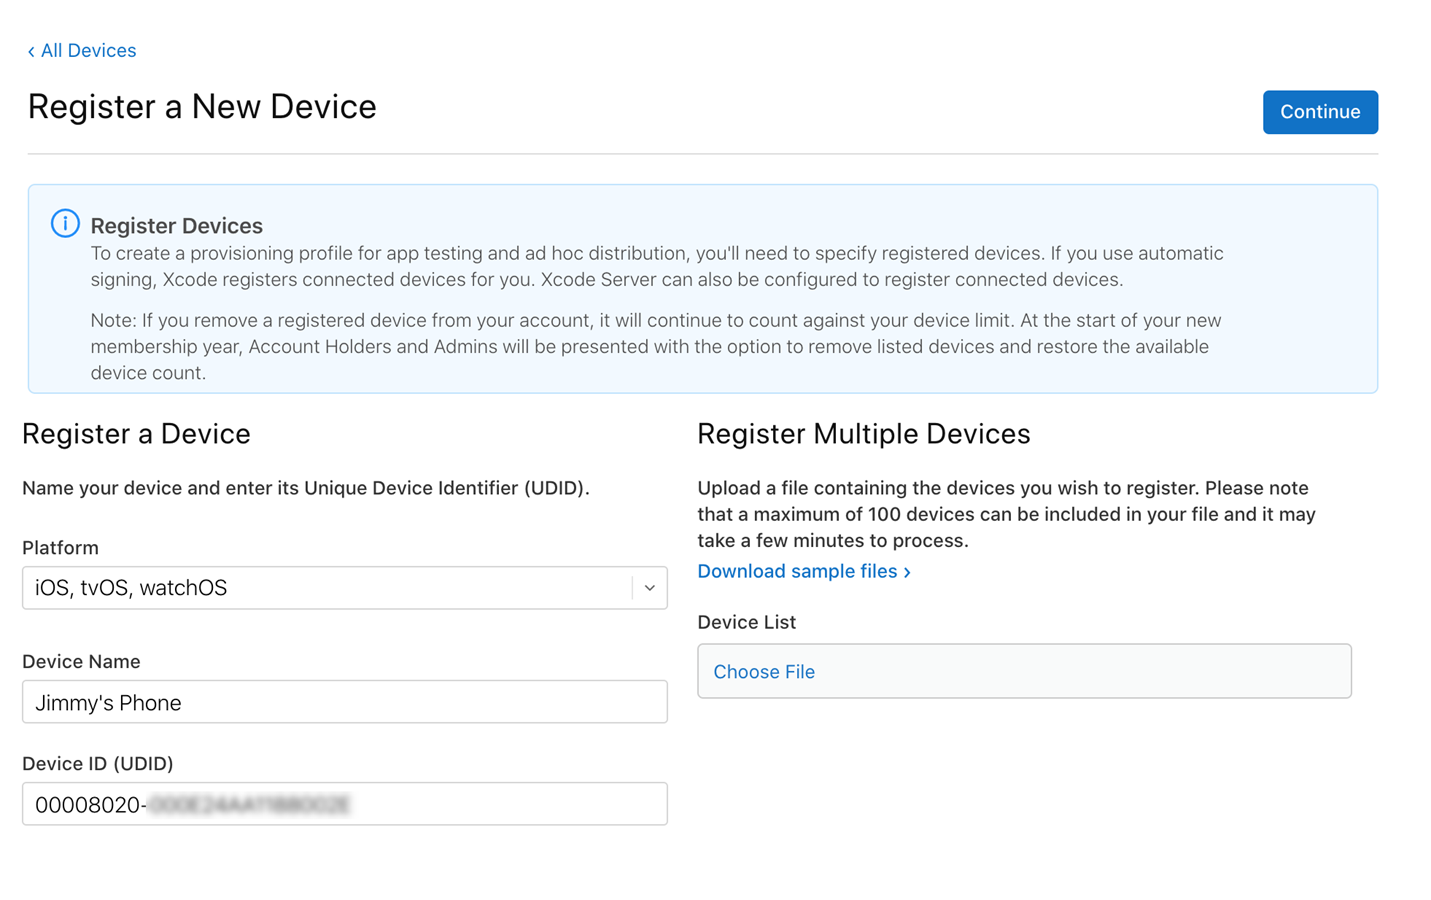 Screenshot of the new device registration page with the fields correctly populated.